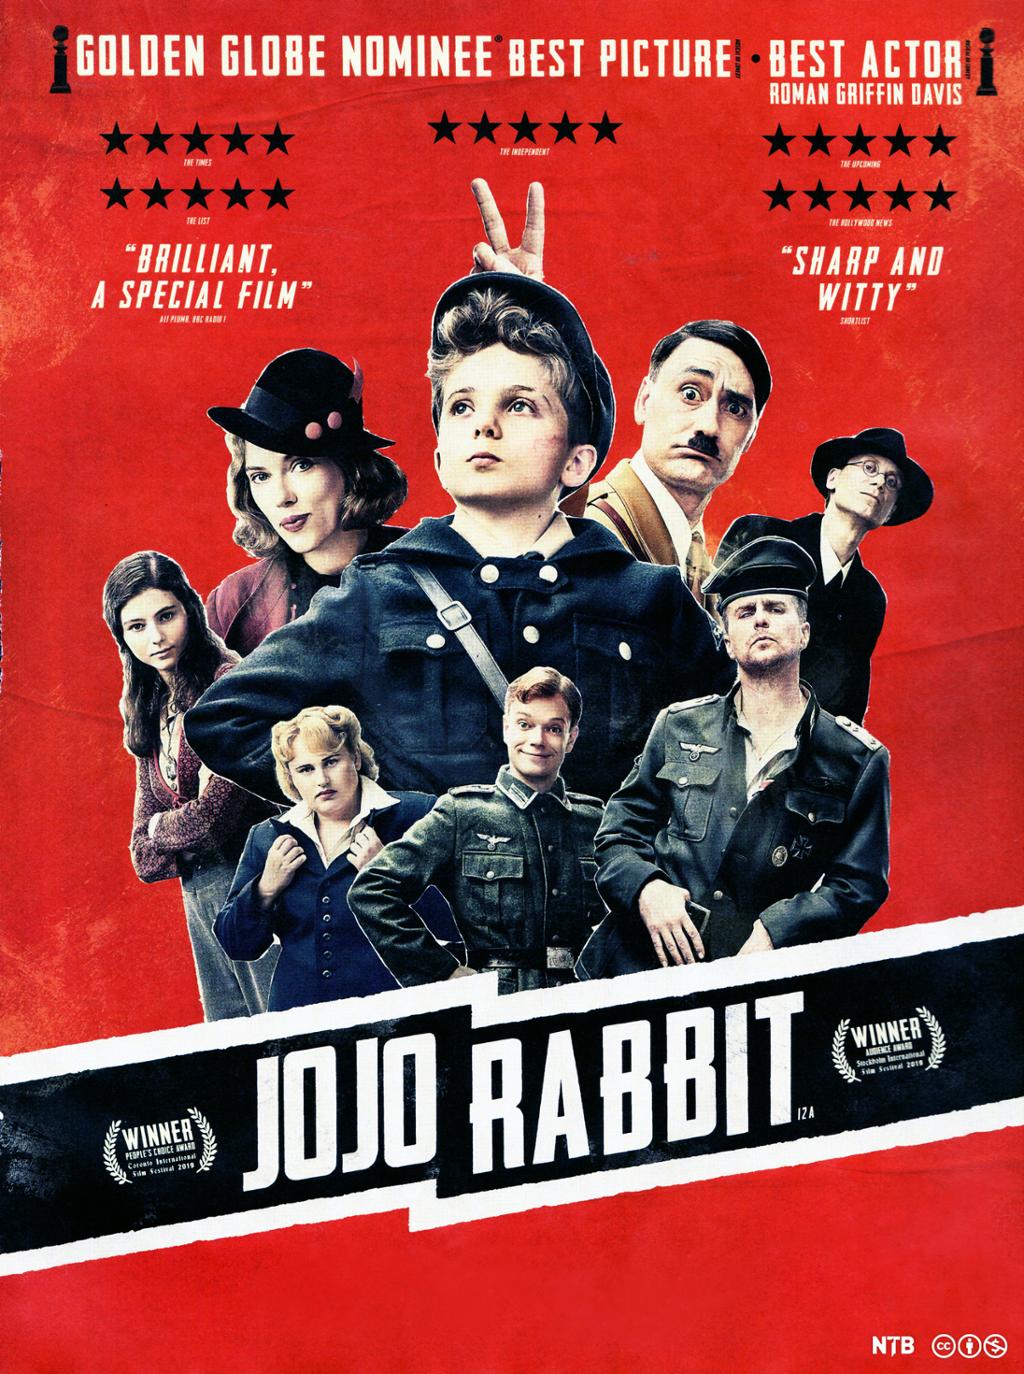 We see a film poster for the film Jo Jo Rabbit. At the centre is a boy in uniform. He is encircled by other characters from the film. The poster also includes positive blurbs about the film, awards won, and star ratings. 